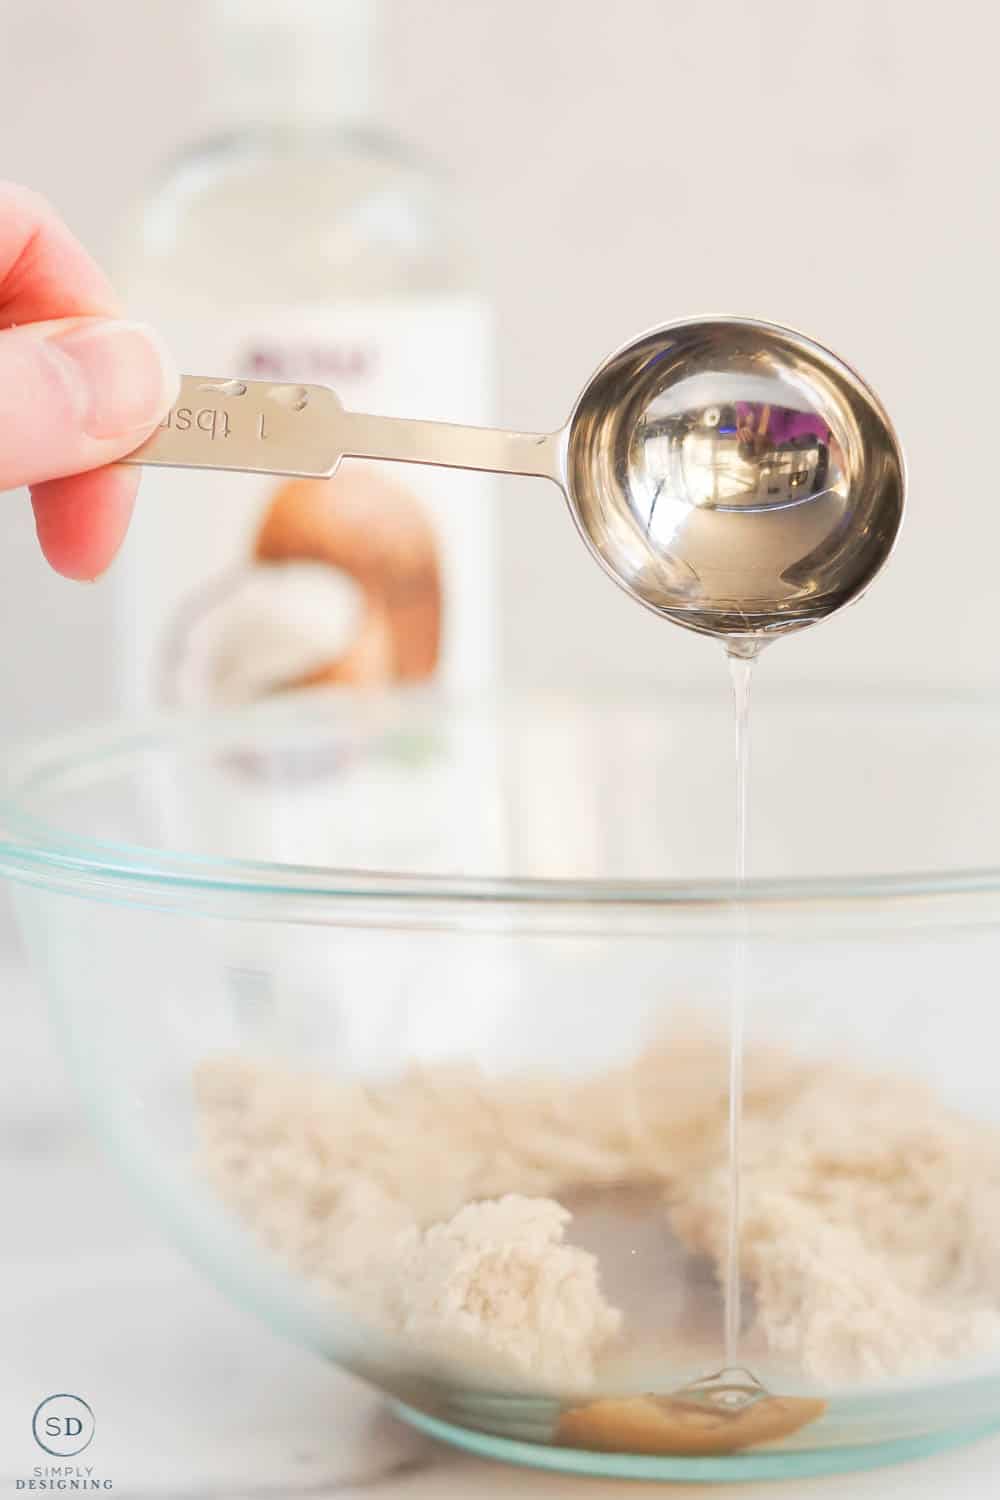 pour coconut oil into bowl with measuring spoon